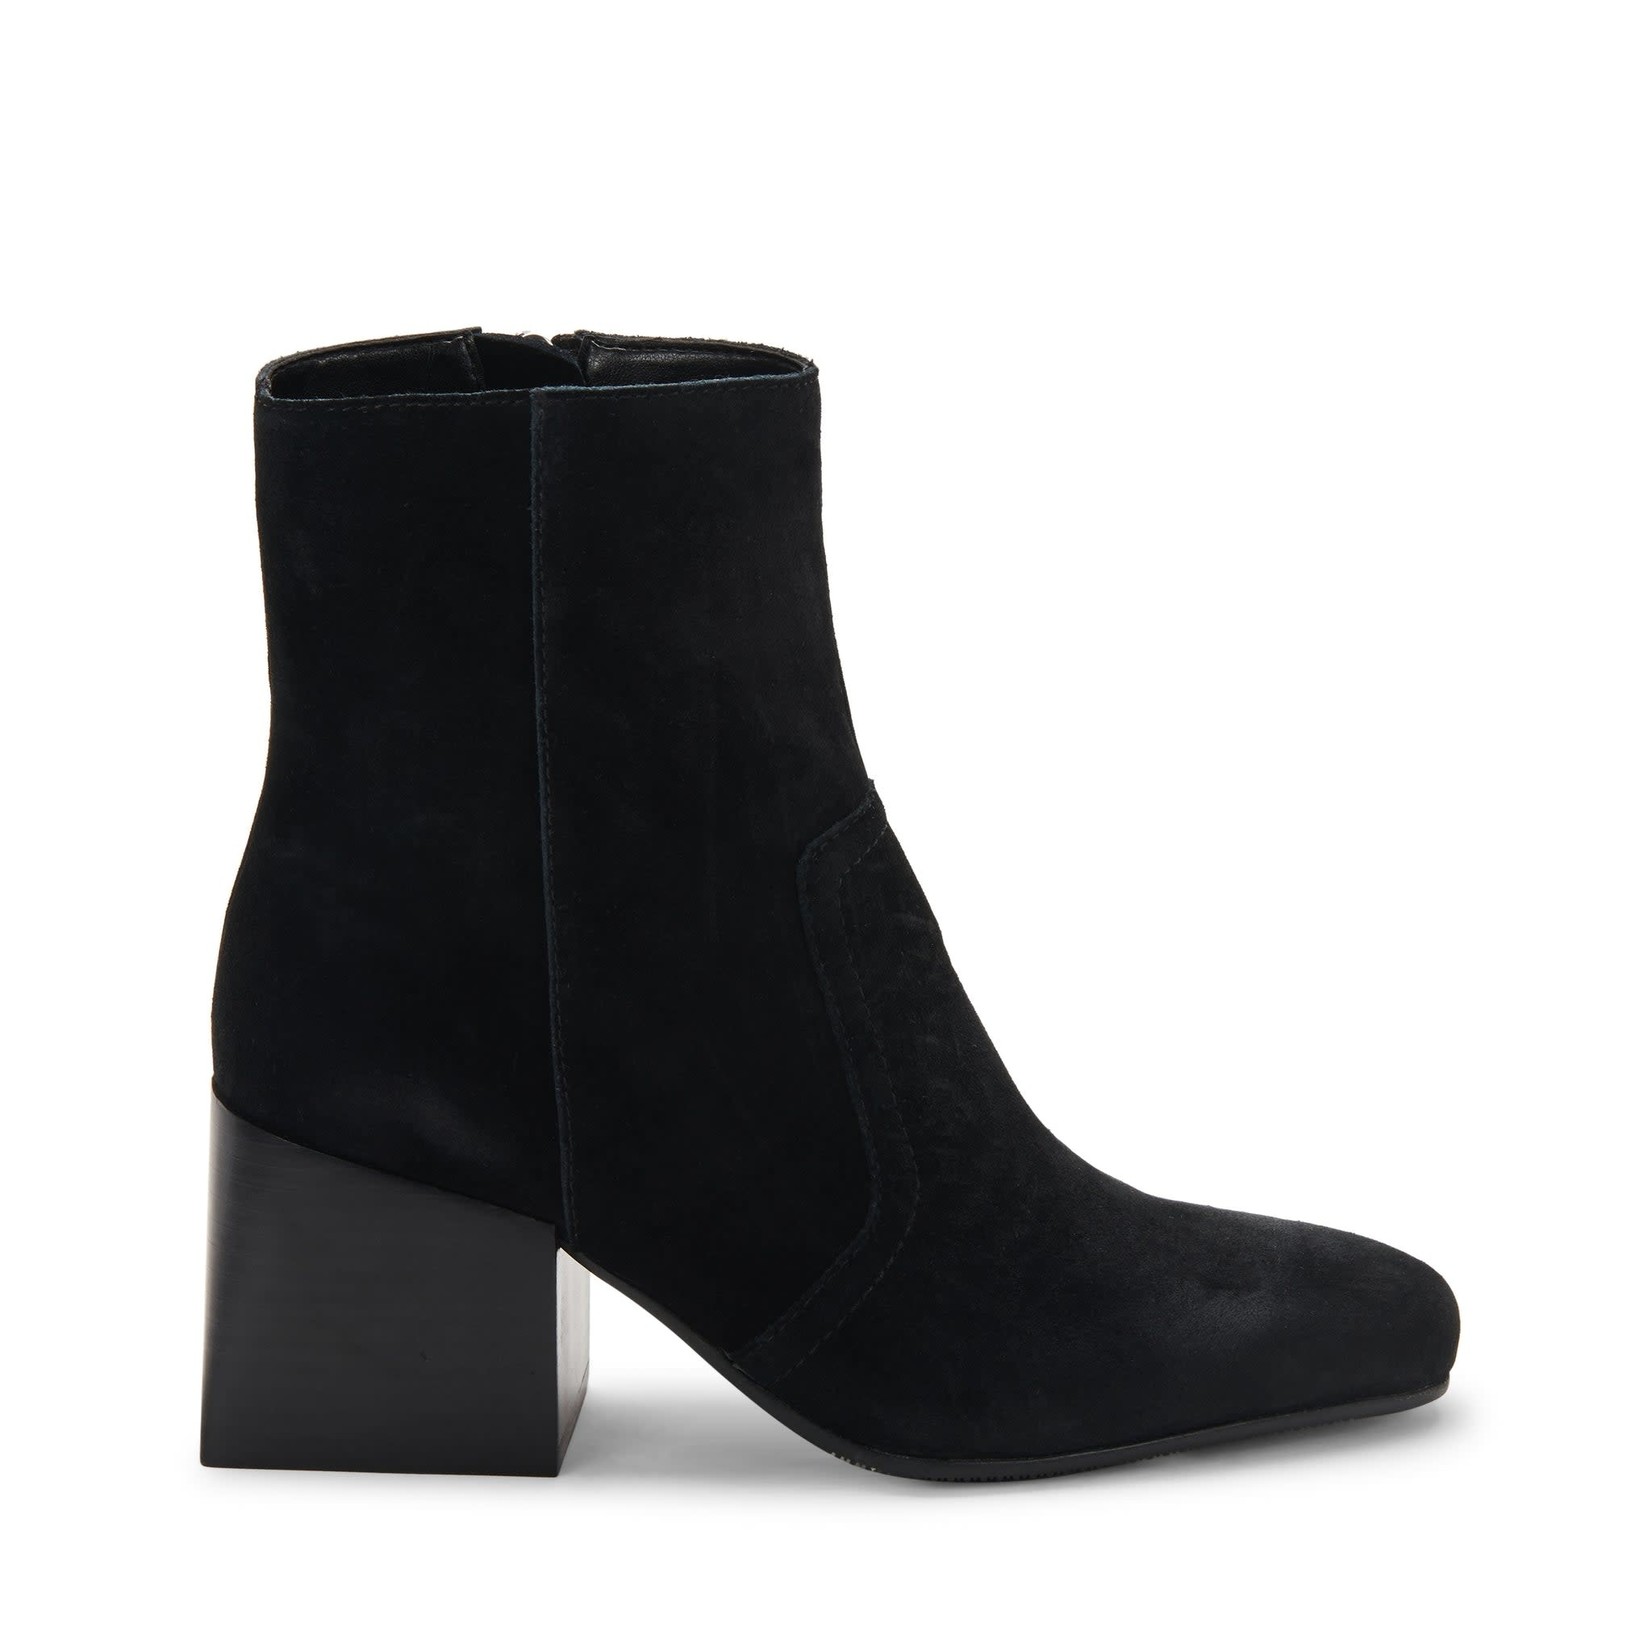 Blondo Salome Black Suede Boots by Blondo